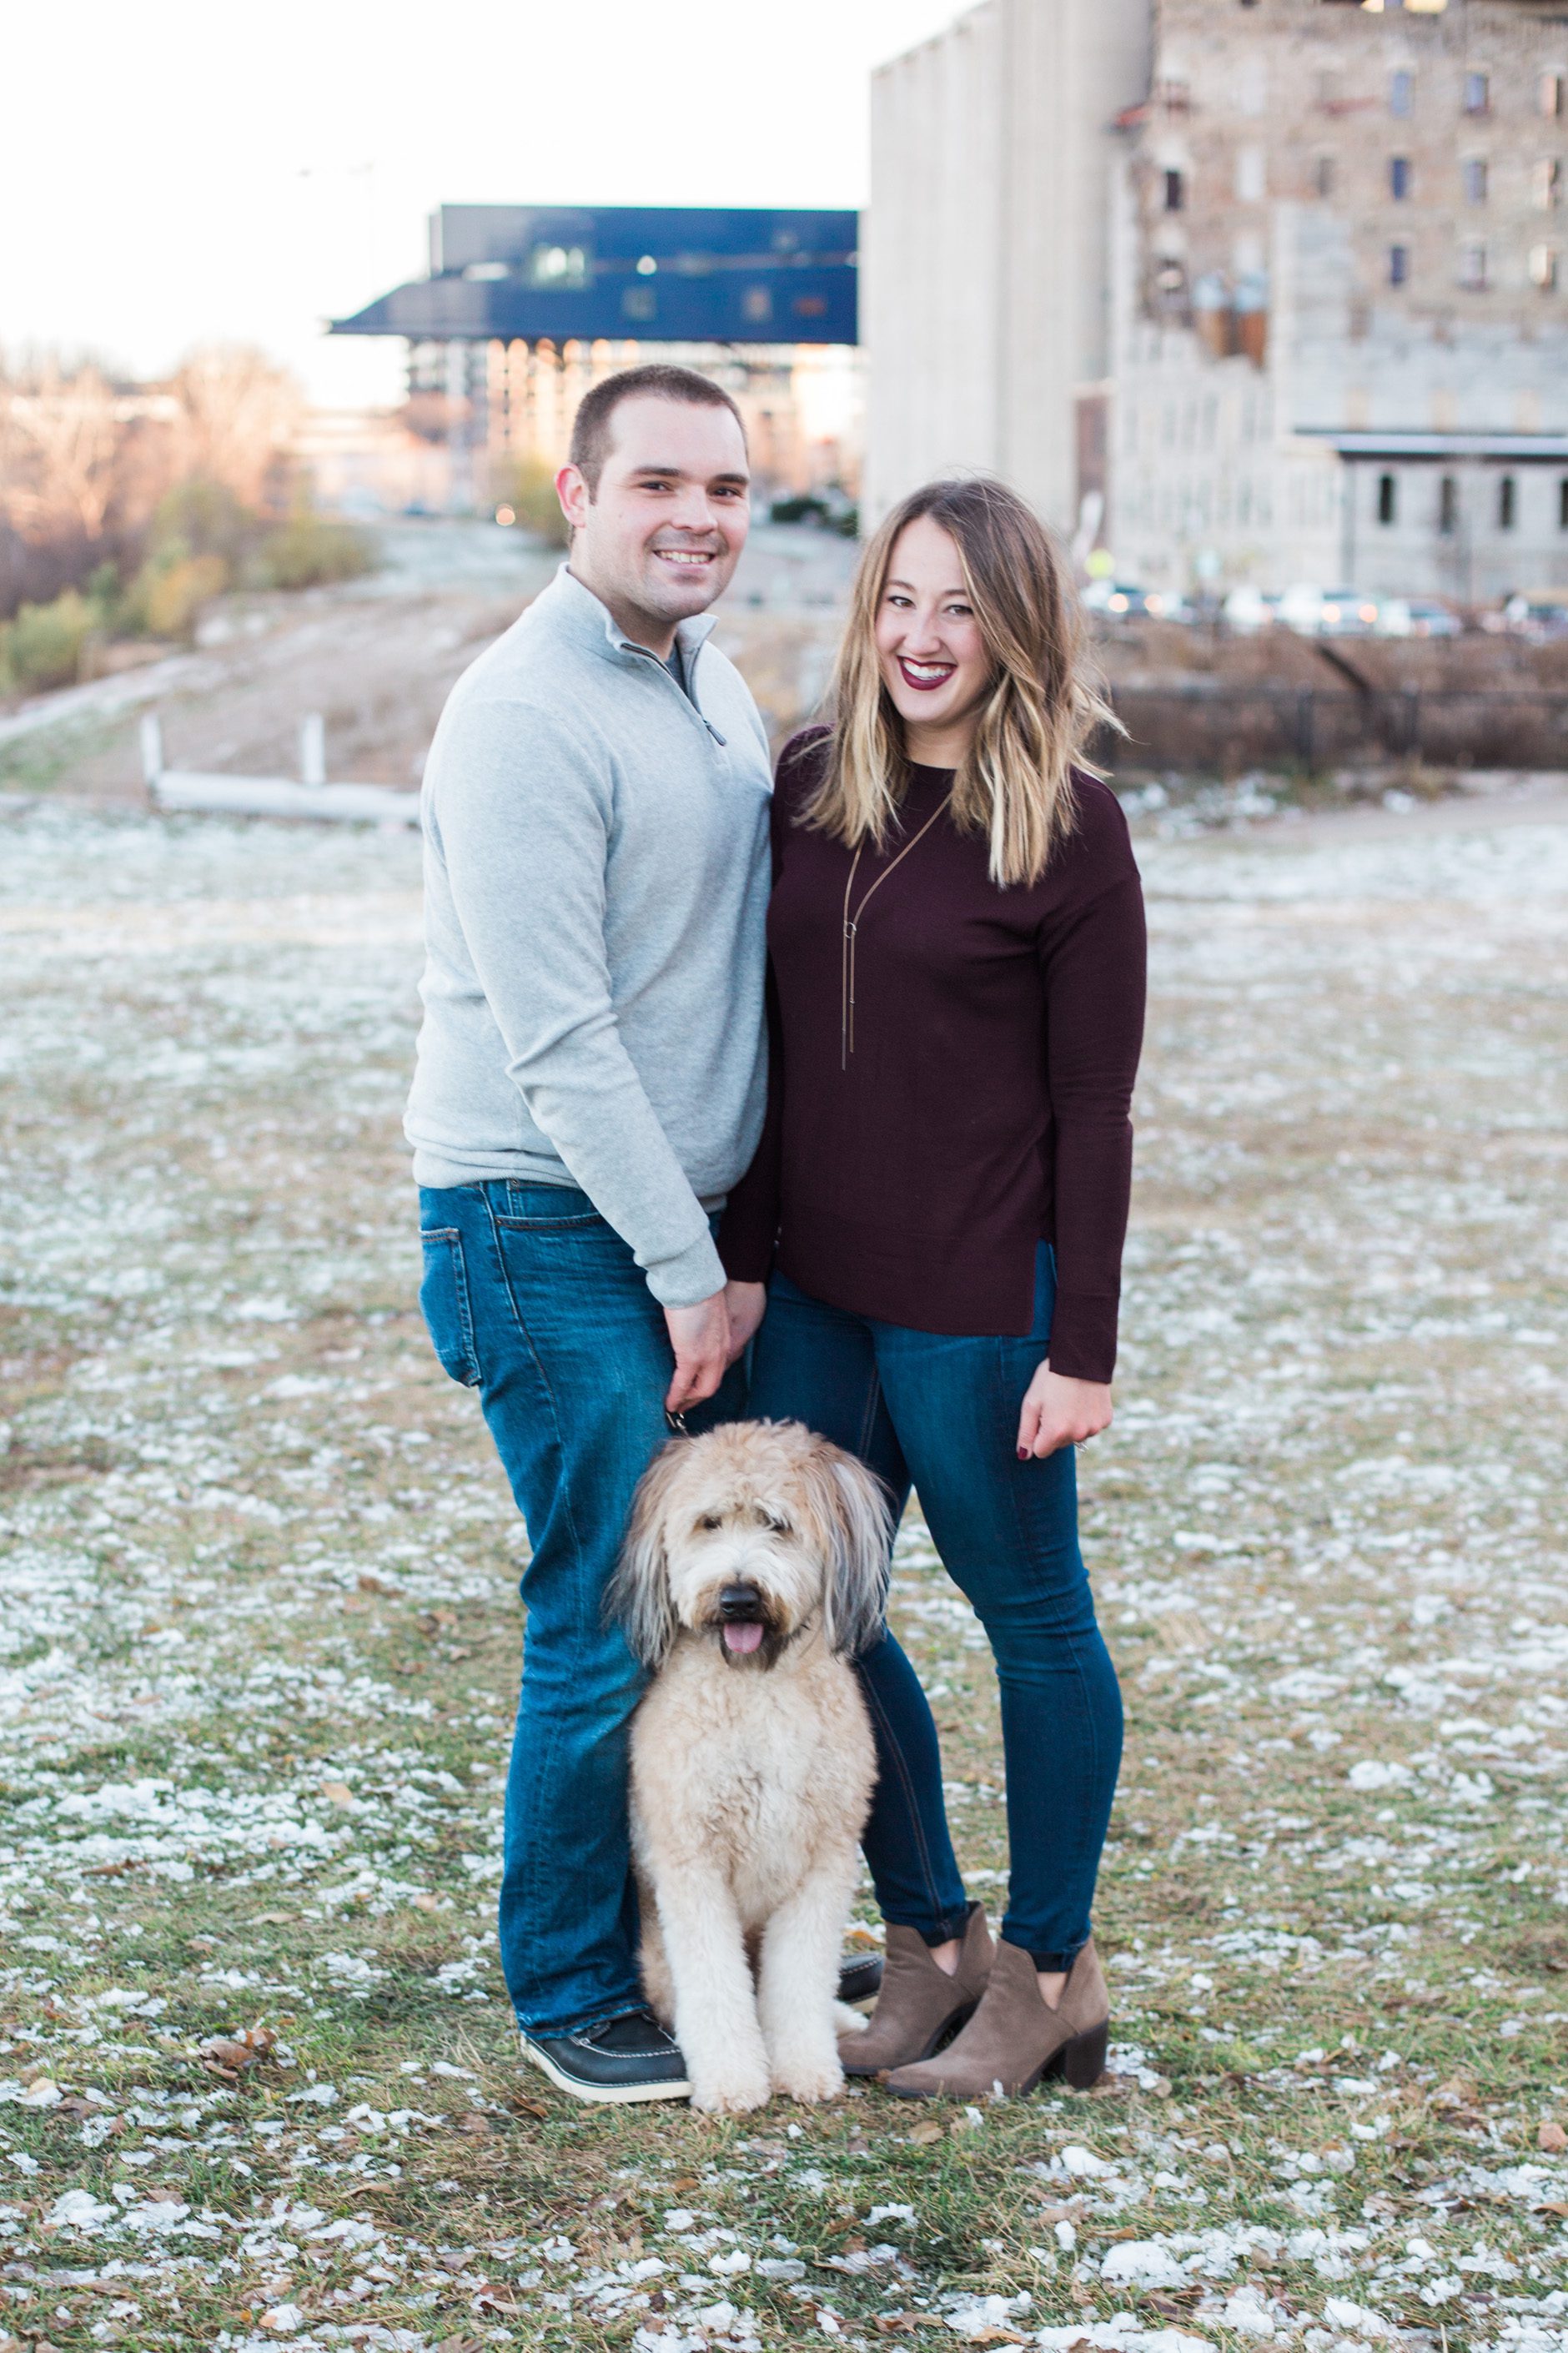 engagement-photography-minneapolis-stonearch-eileenkphoto-199